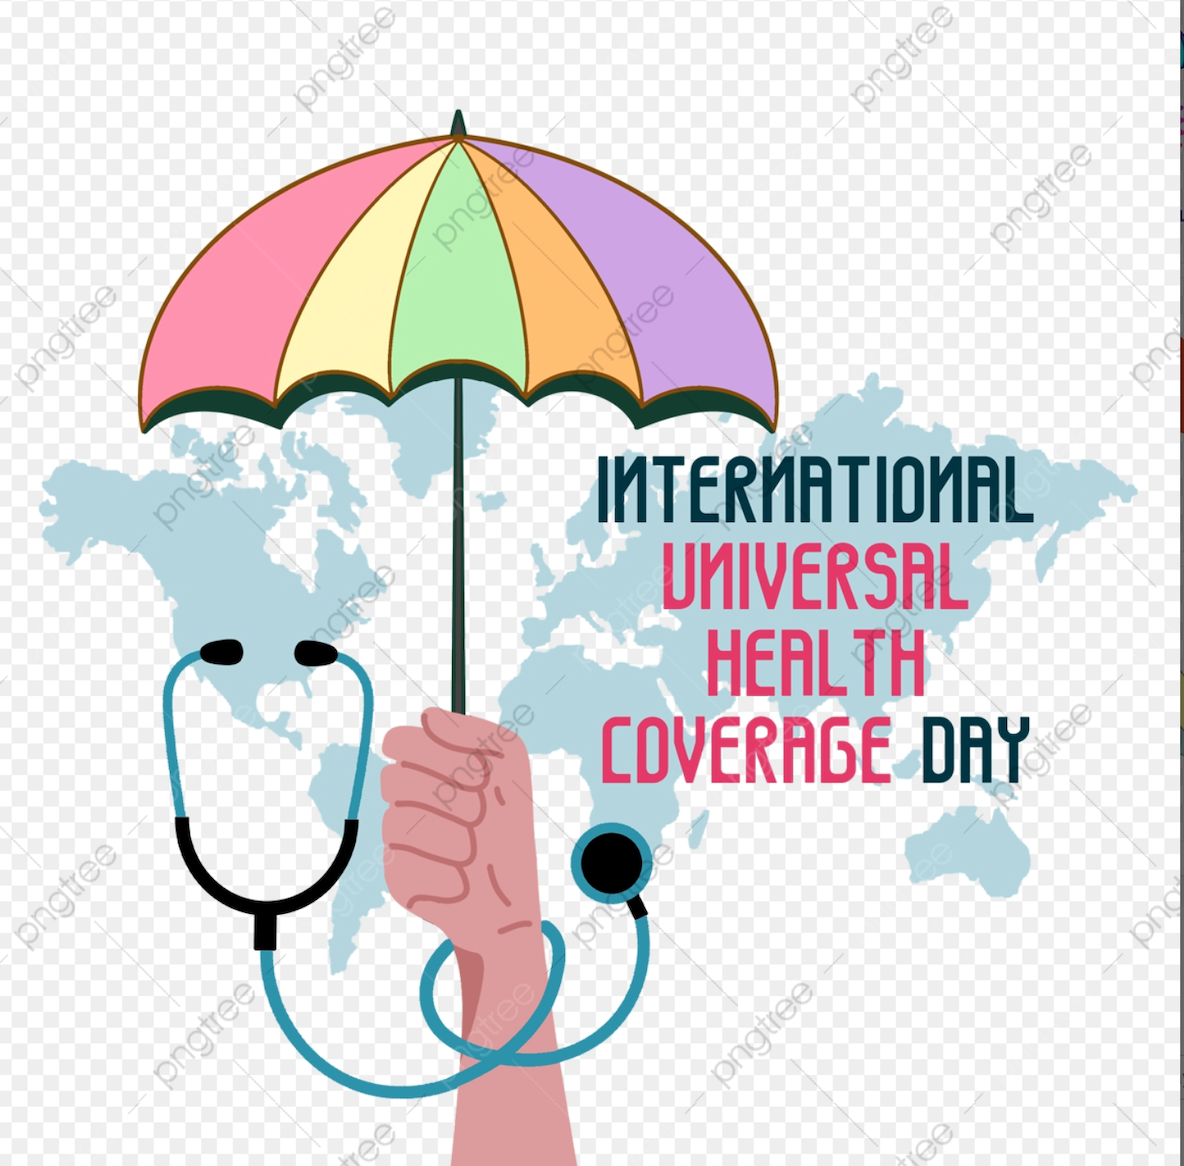 Somalia celebrates Universal Health Coverage day: translating the dream of ‘health for all’ into a reality